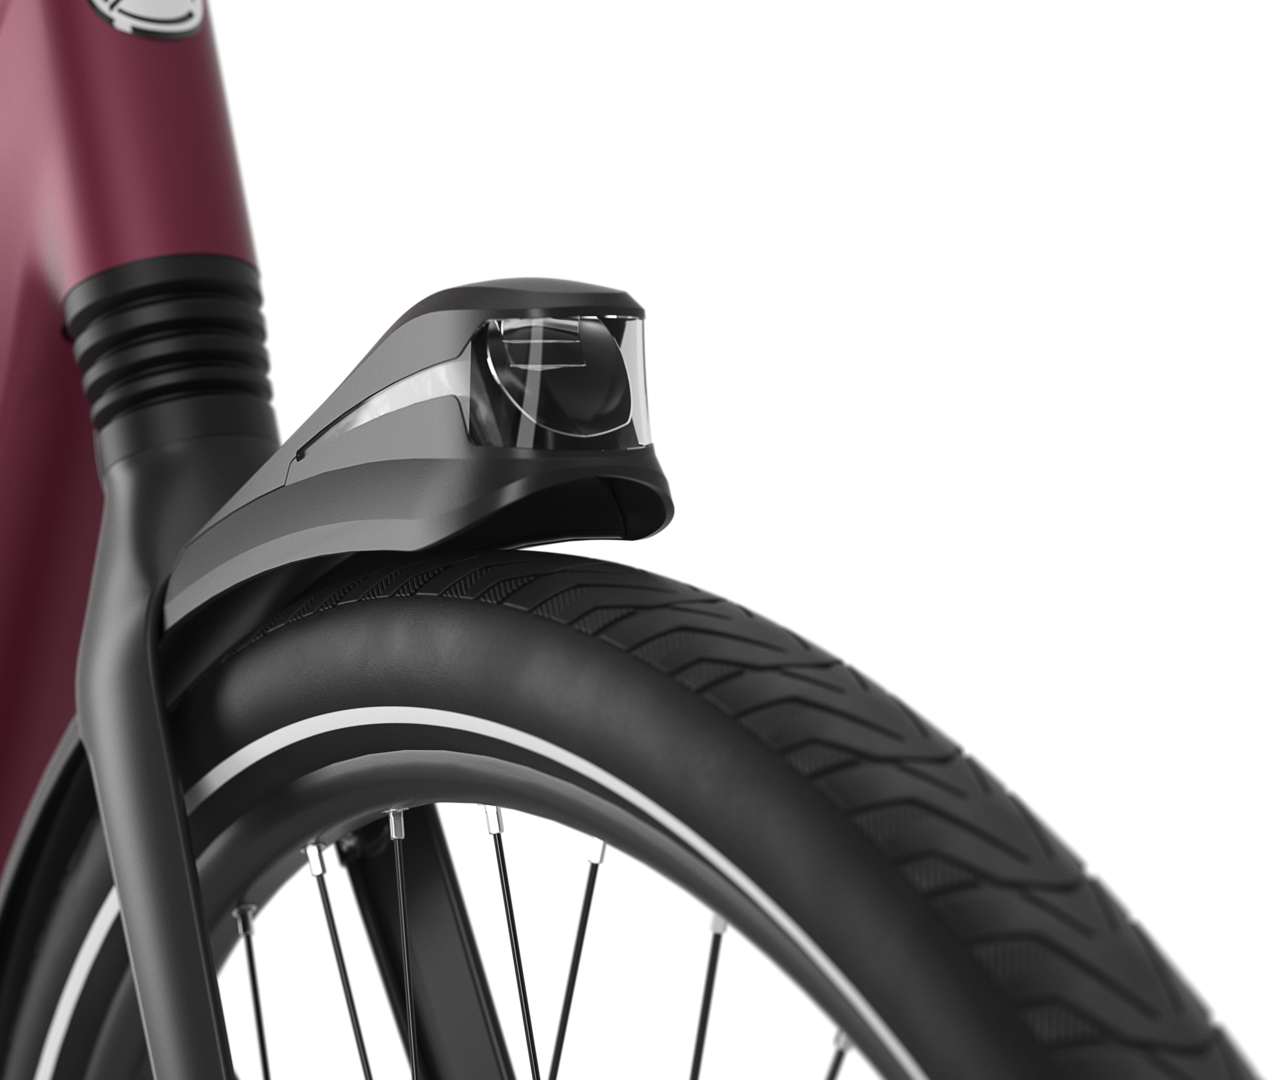 Integrated lighting makes you easier to see Gazelle Avignon C8 HMB E-bike low-step coral red